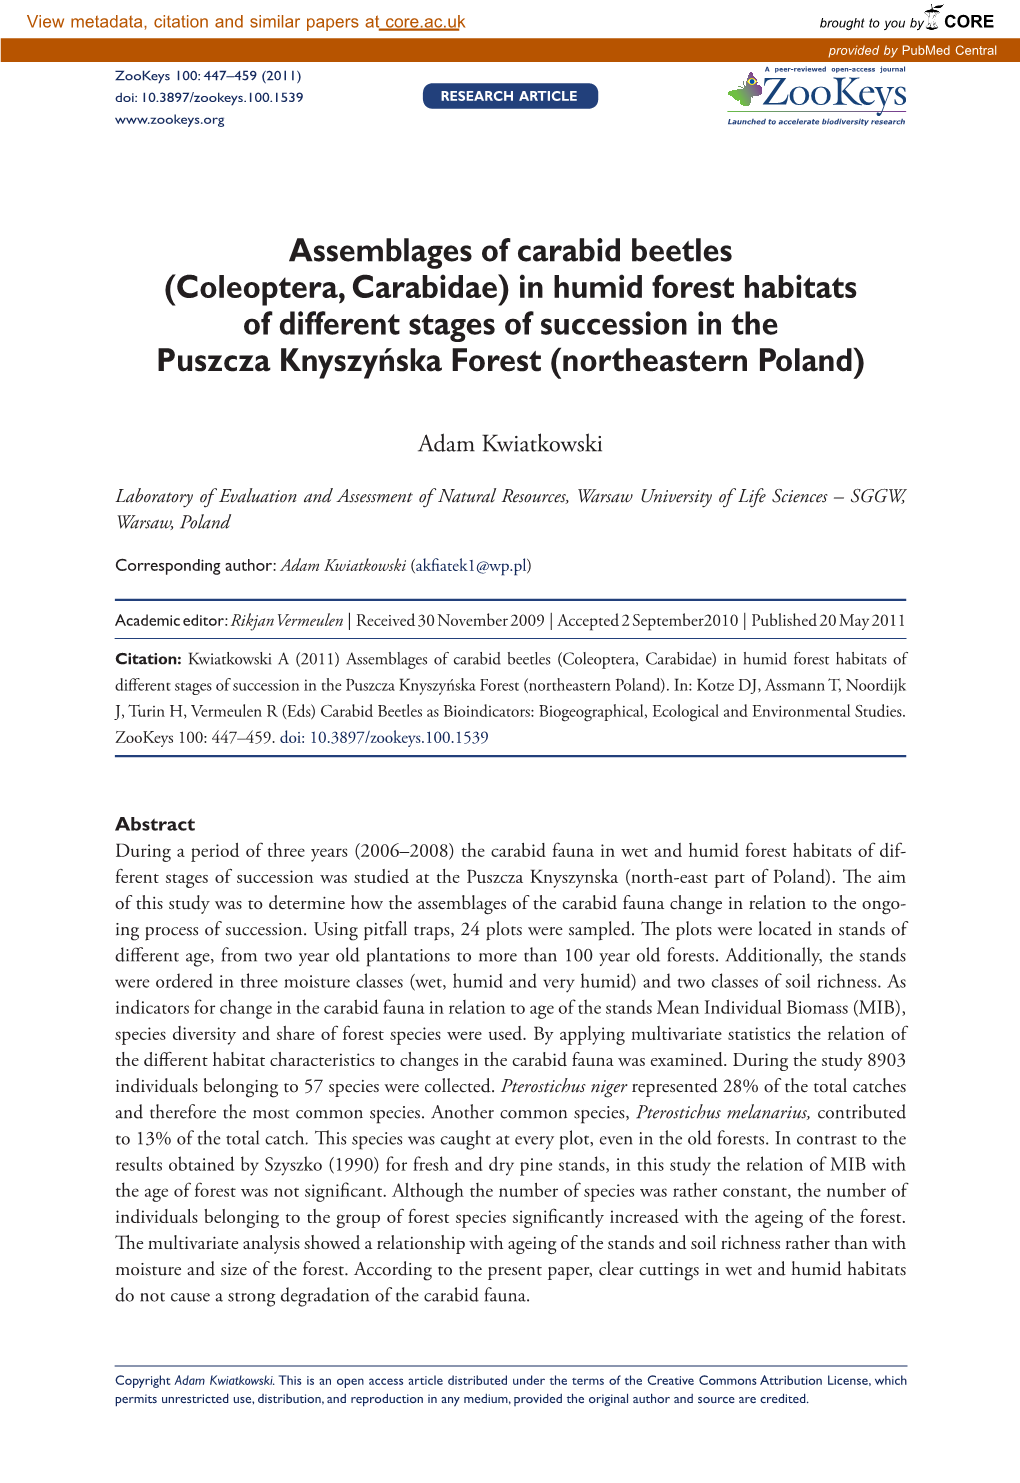 Coleoptera, Carabidae) in Humid Forest Habitats of Different Stages of Succession in the Puszcza Knyszyńska Forest (Northeastern Poland)